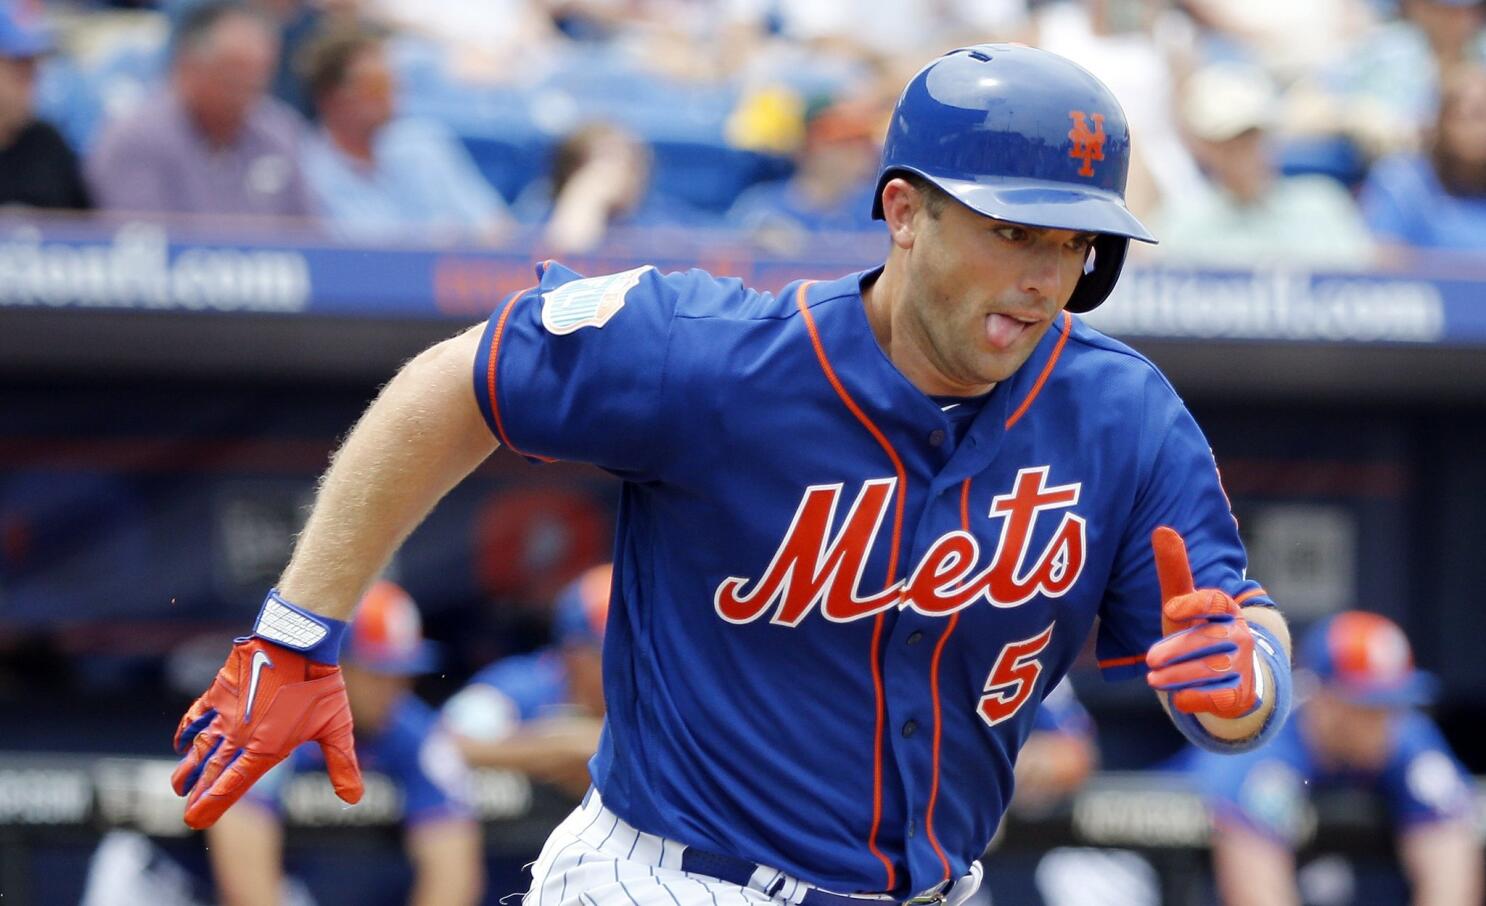 New York Mets: 3B David Wright to see back specialist - Sports Illustrated